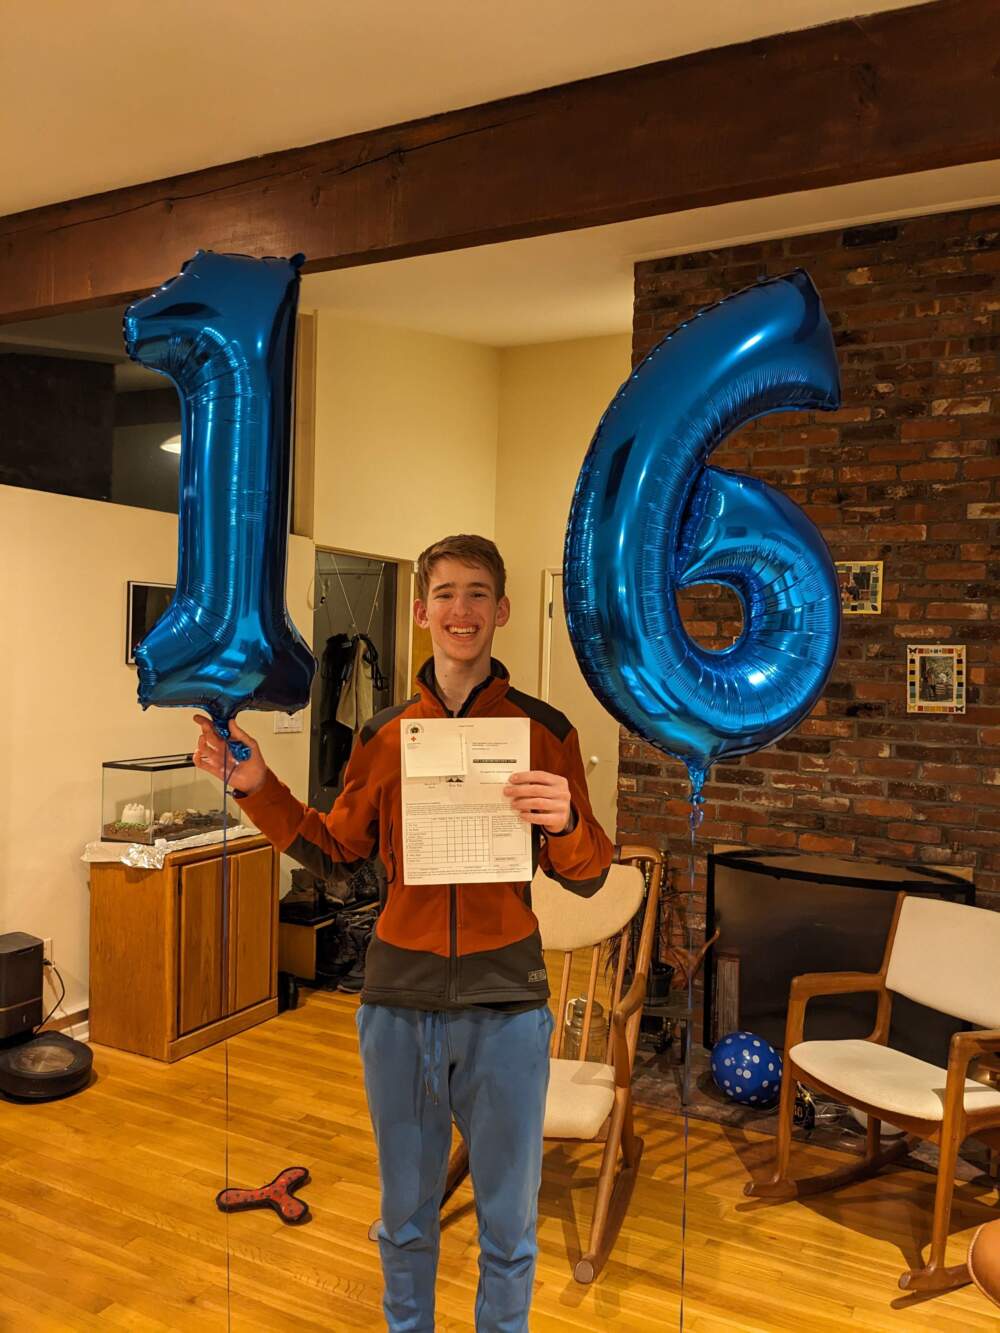 The author's son, Simon Mintz, celebrates getting his learner's permit, a day after his 16th birthday. (Courtesy Linda K. Wertheimer)